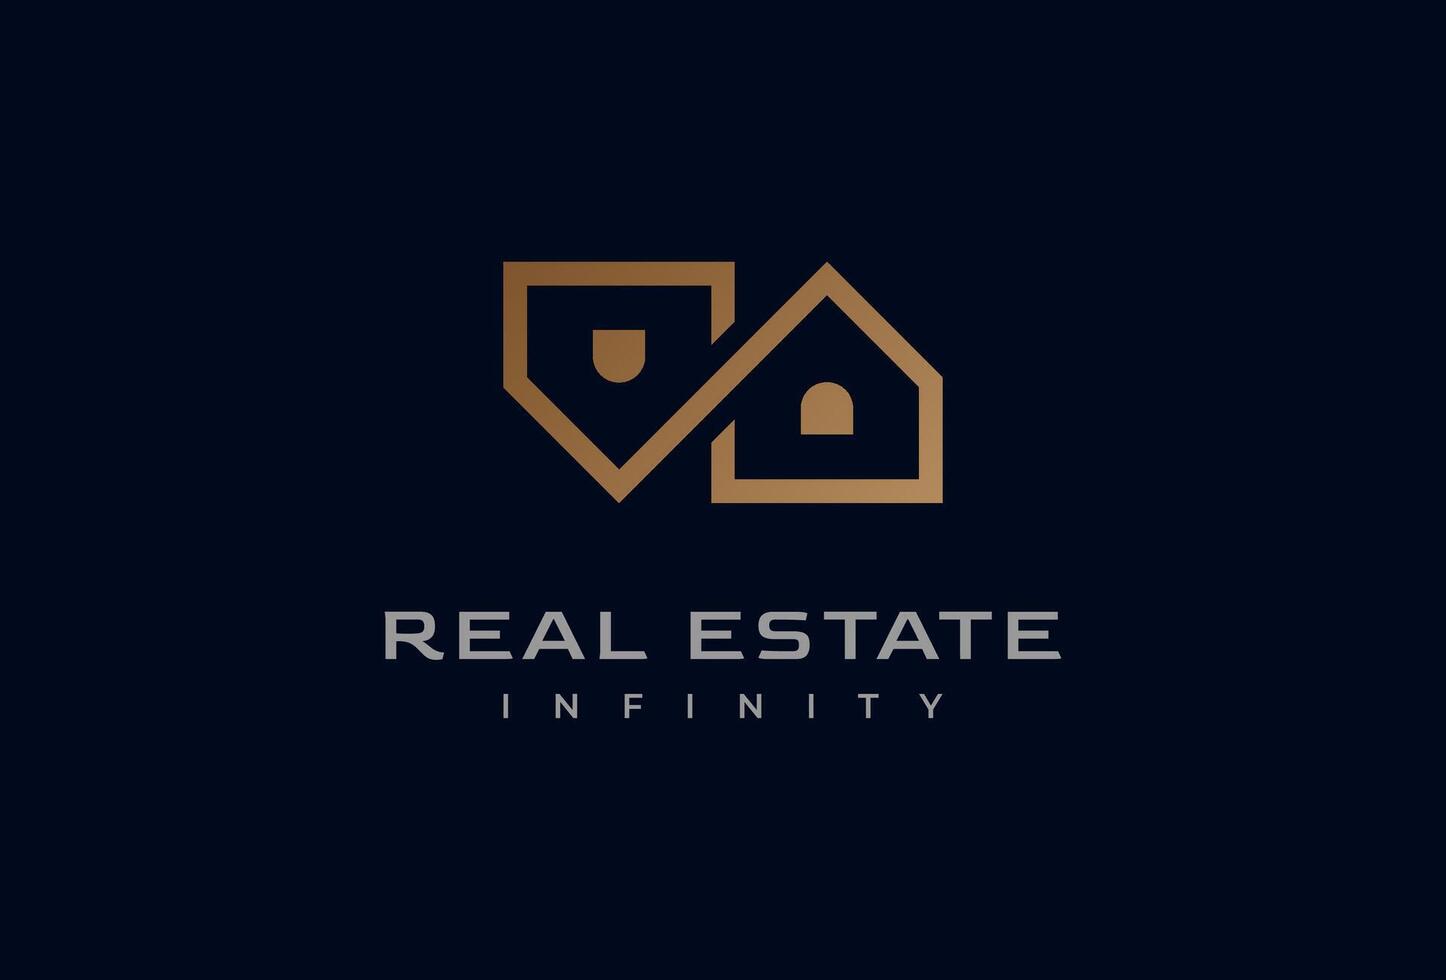 Real Estate Infinity Logo design, building and infinity icon combination, suitable for Architecture Building apps logo design, illustration vector